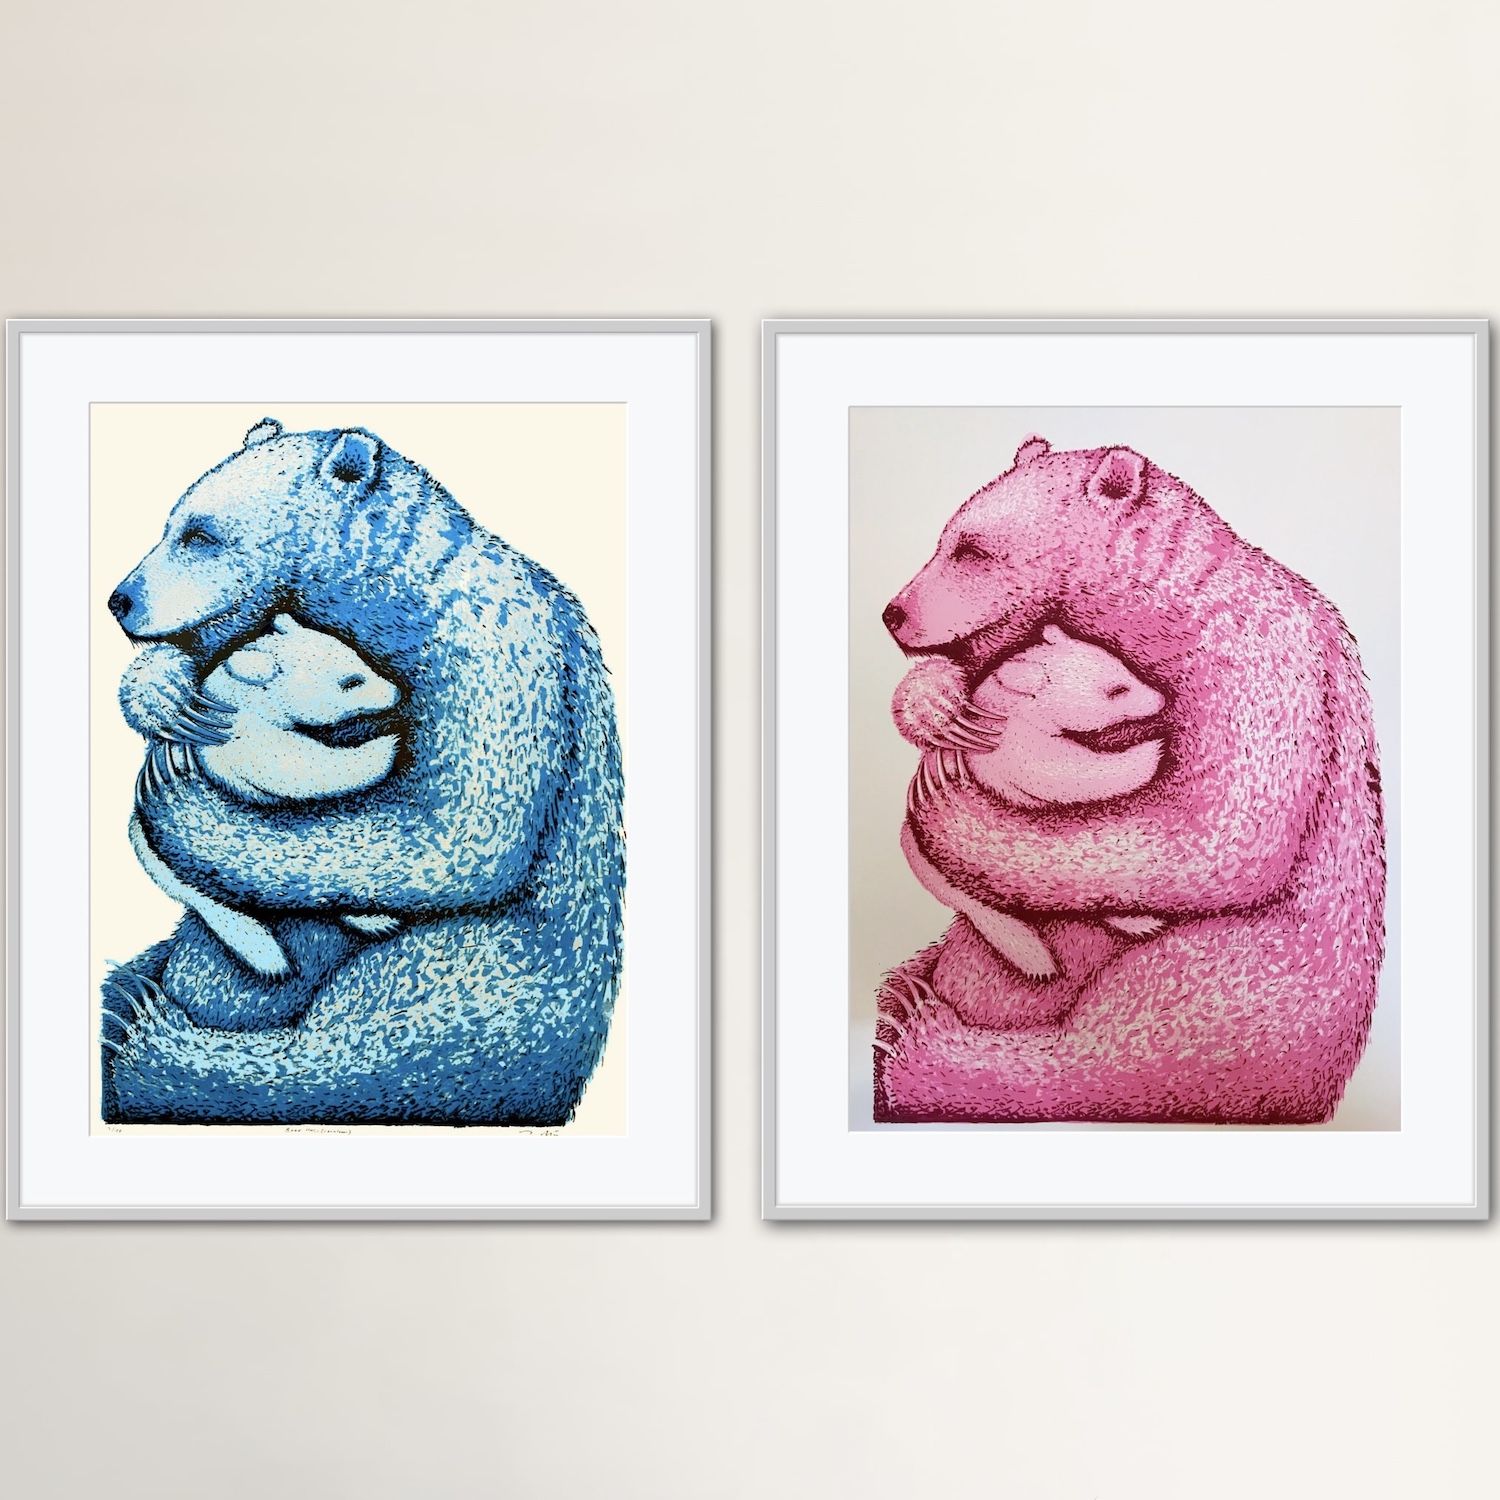 Bear Hugs (Hot Pink and Blue) by Tim Southall